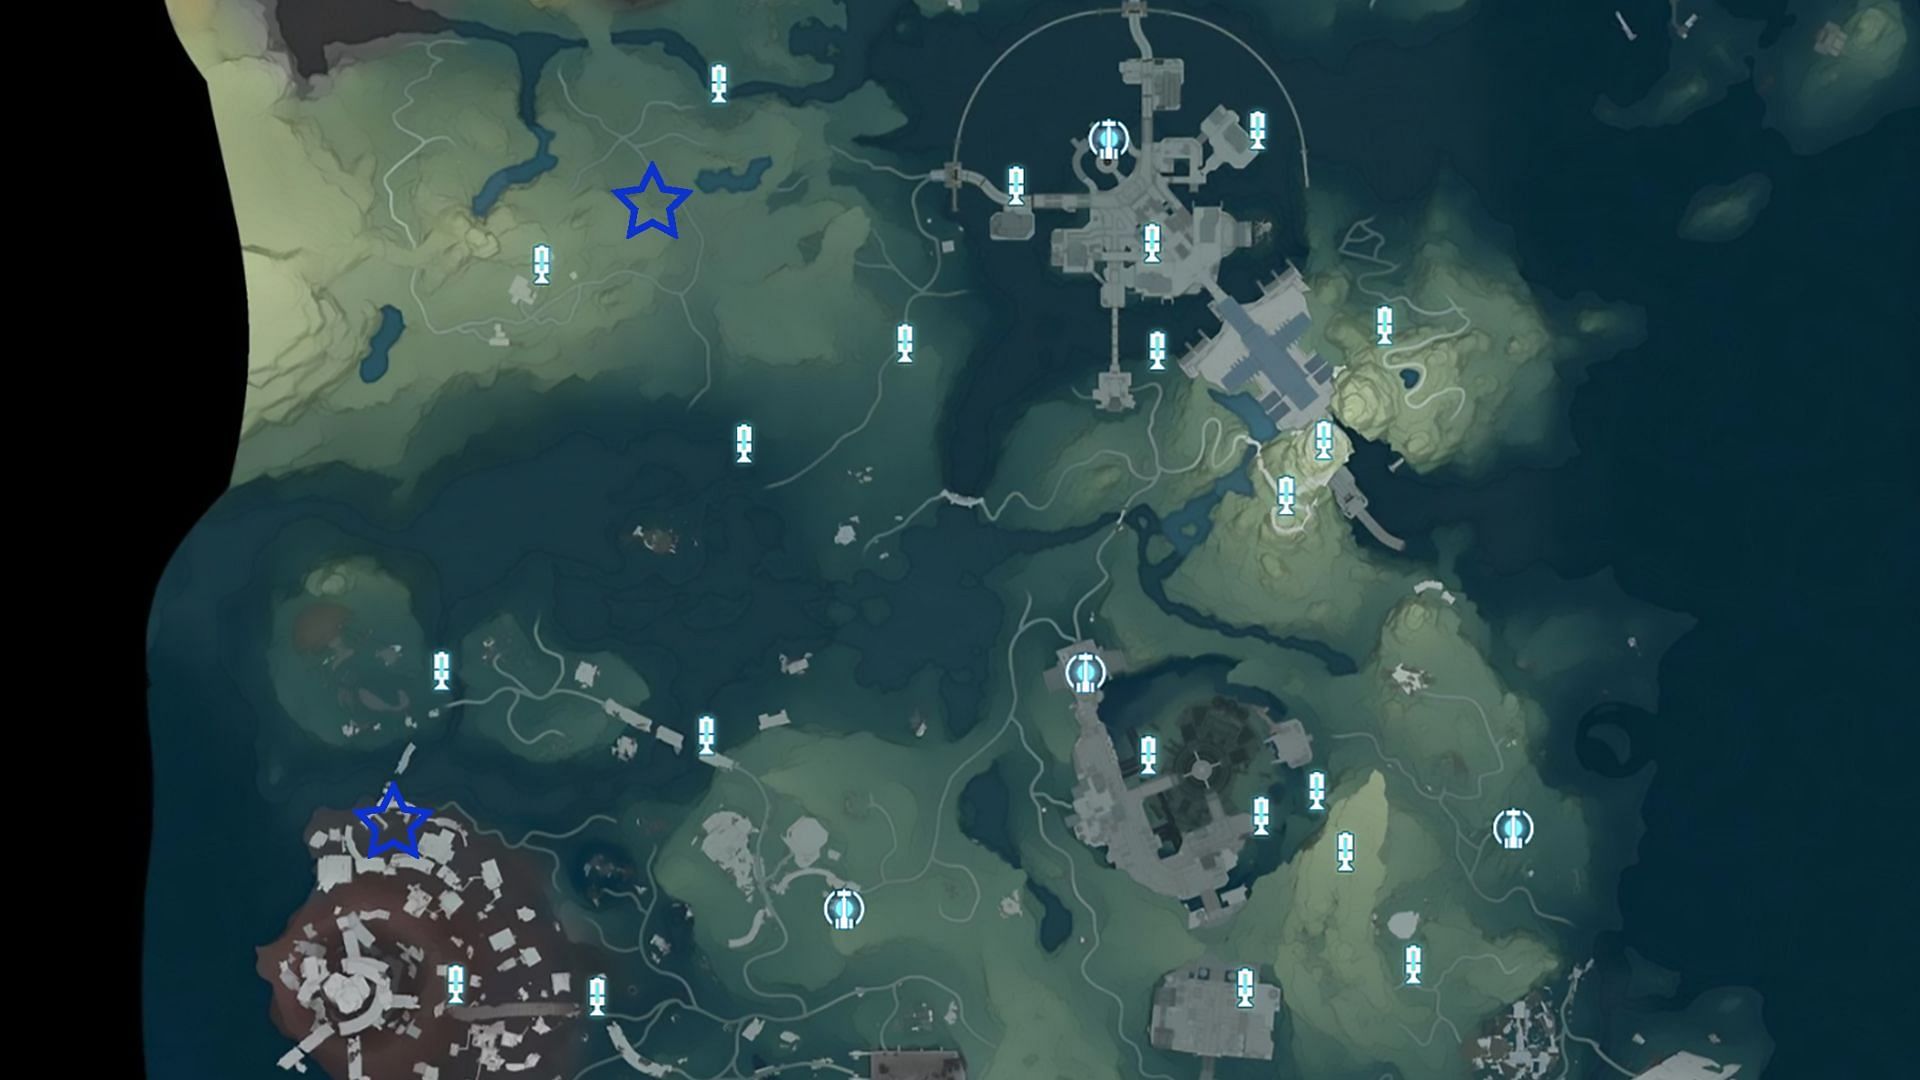 Rocksteady Guardians location 2 (Image via appsample interactive map)